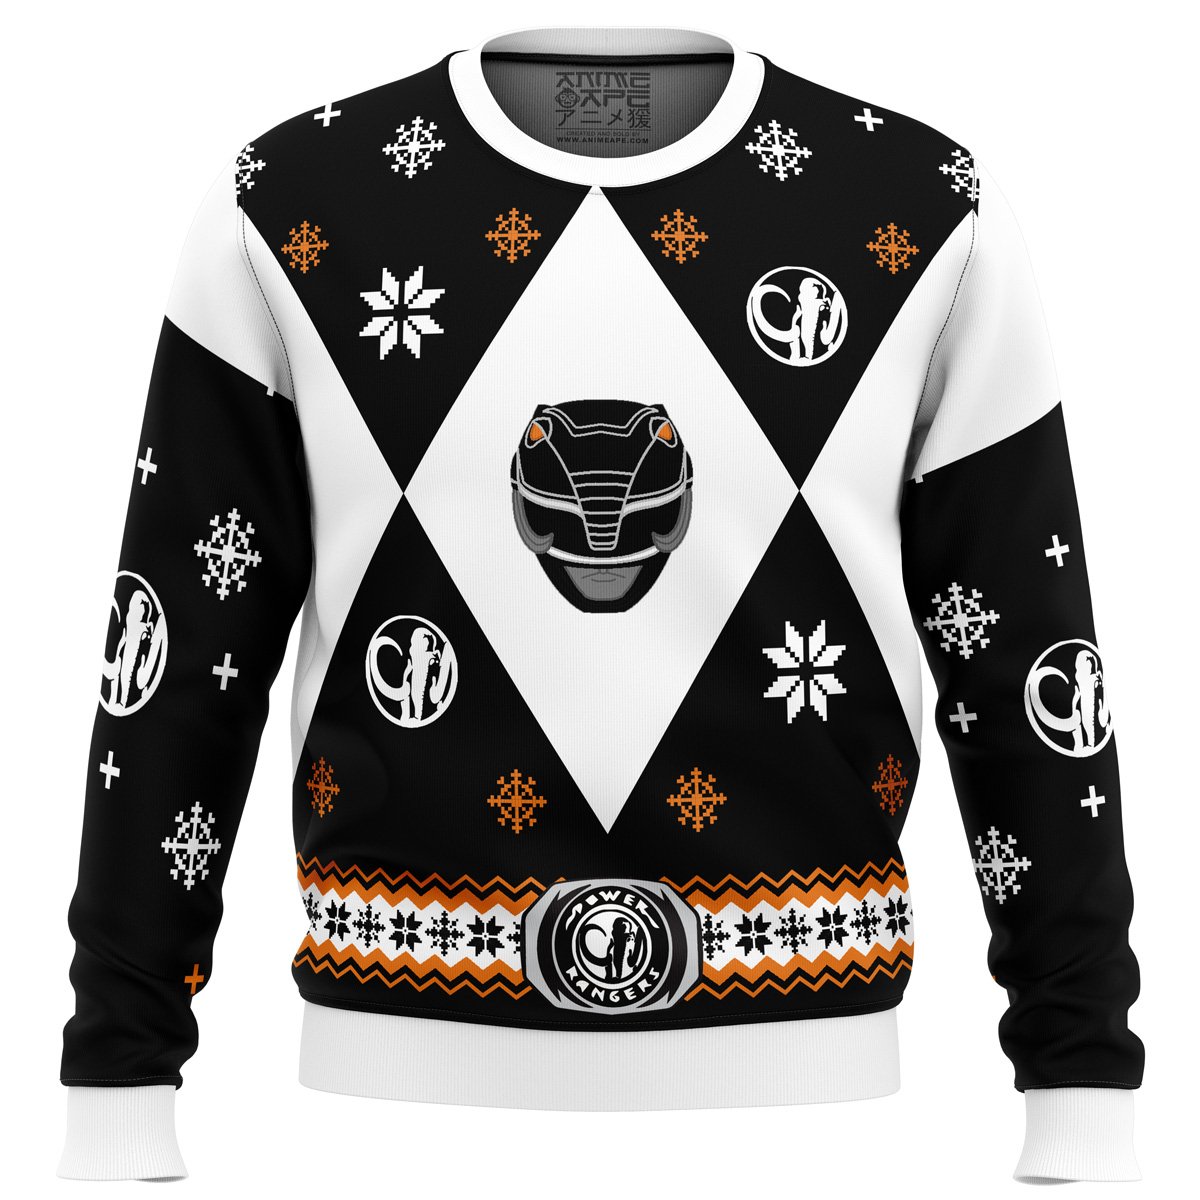 Mighty Morphin Power Rangers Black Ugly Christmas Sweater